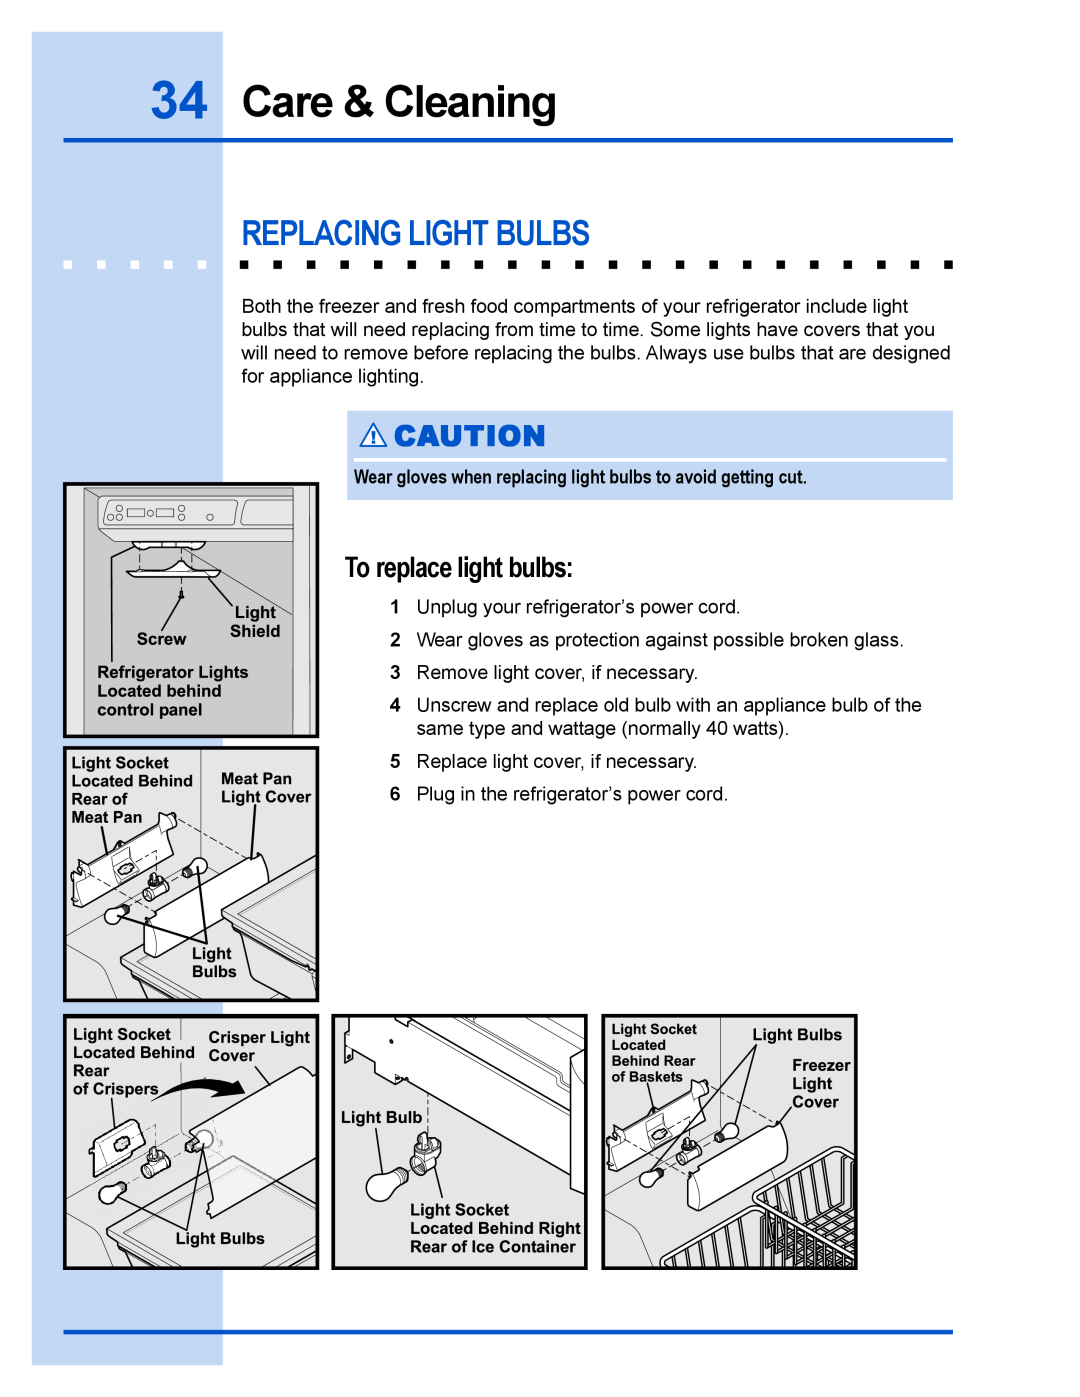 Electrolux 241540102 manual Care & Cleaning, Replacing Light Bulbs, To replace light bulbs 